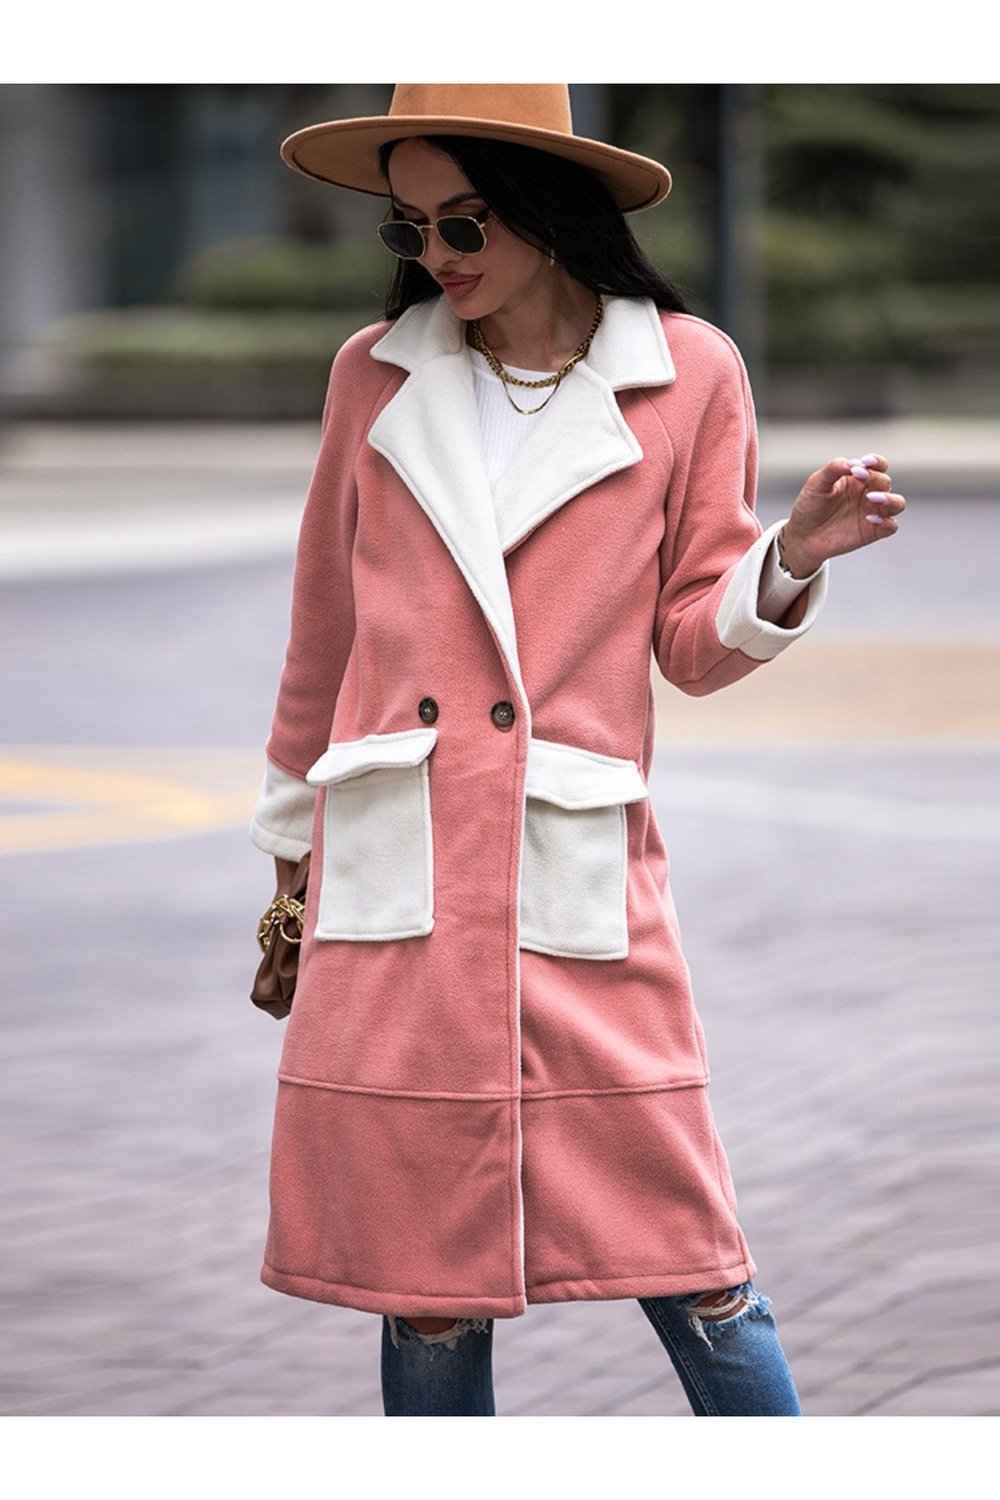 Contrast Lapel Collar Coat with Pockets - Jackets - FITGGINS